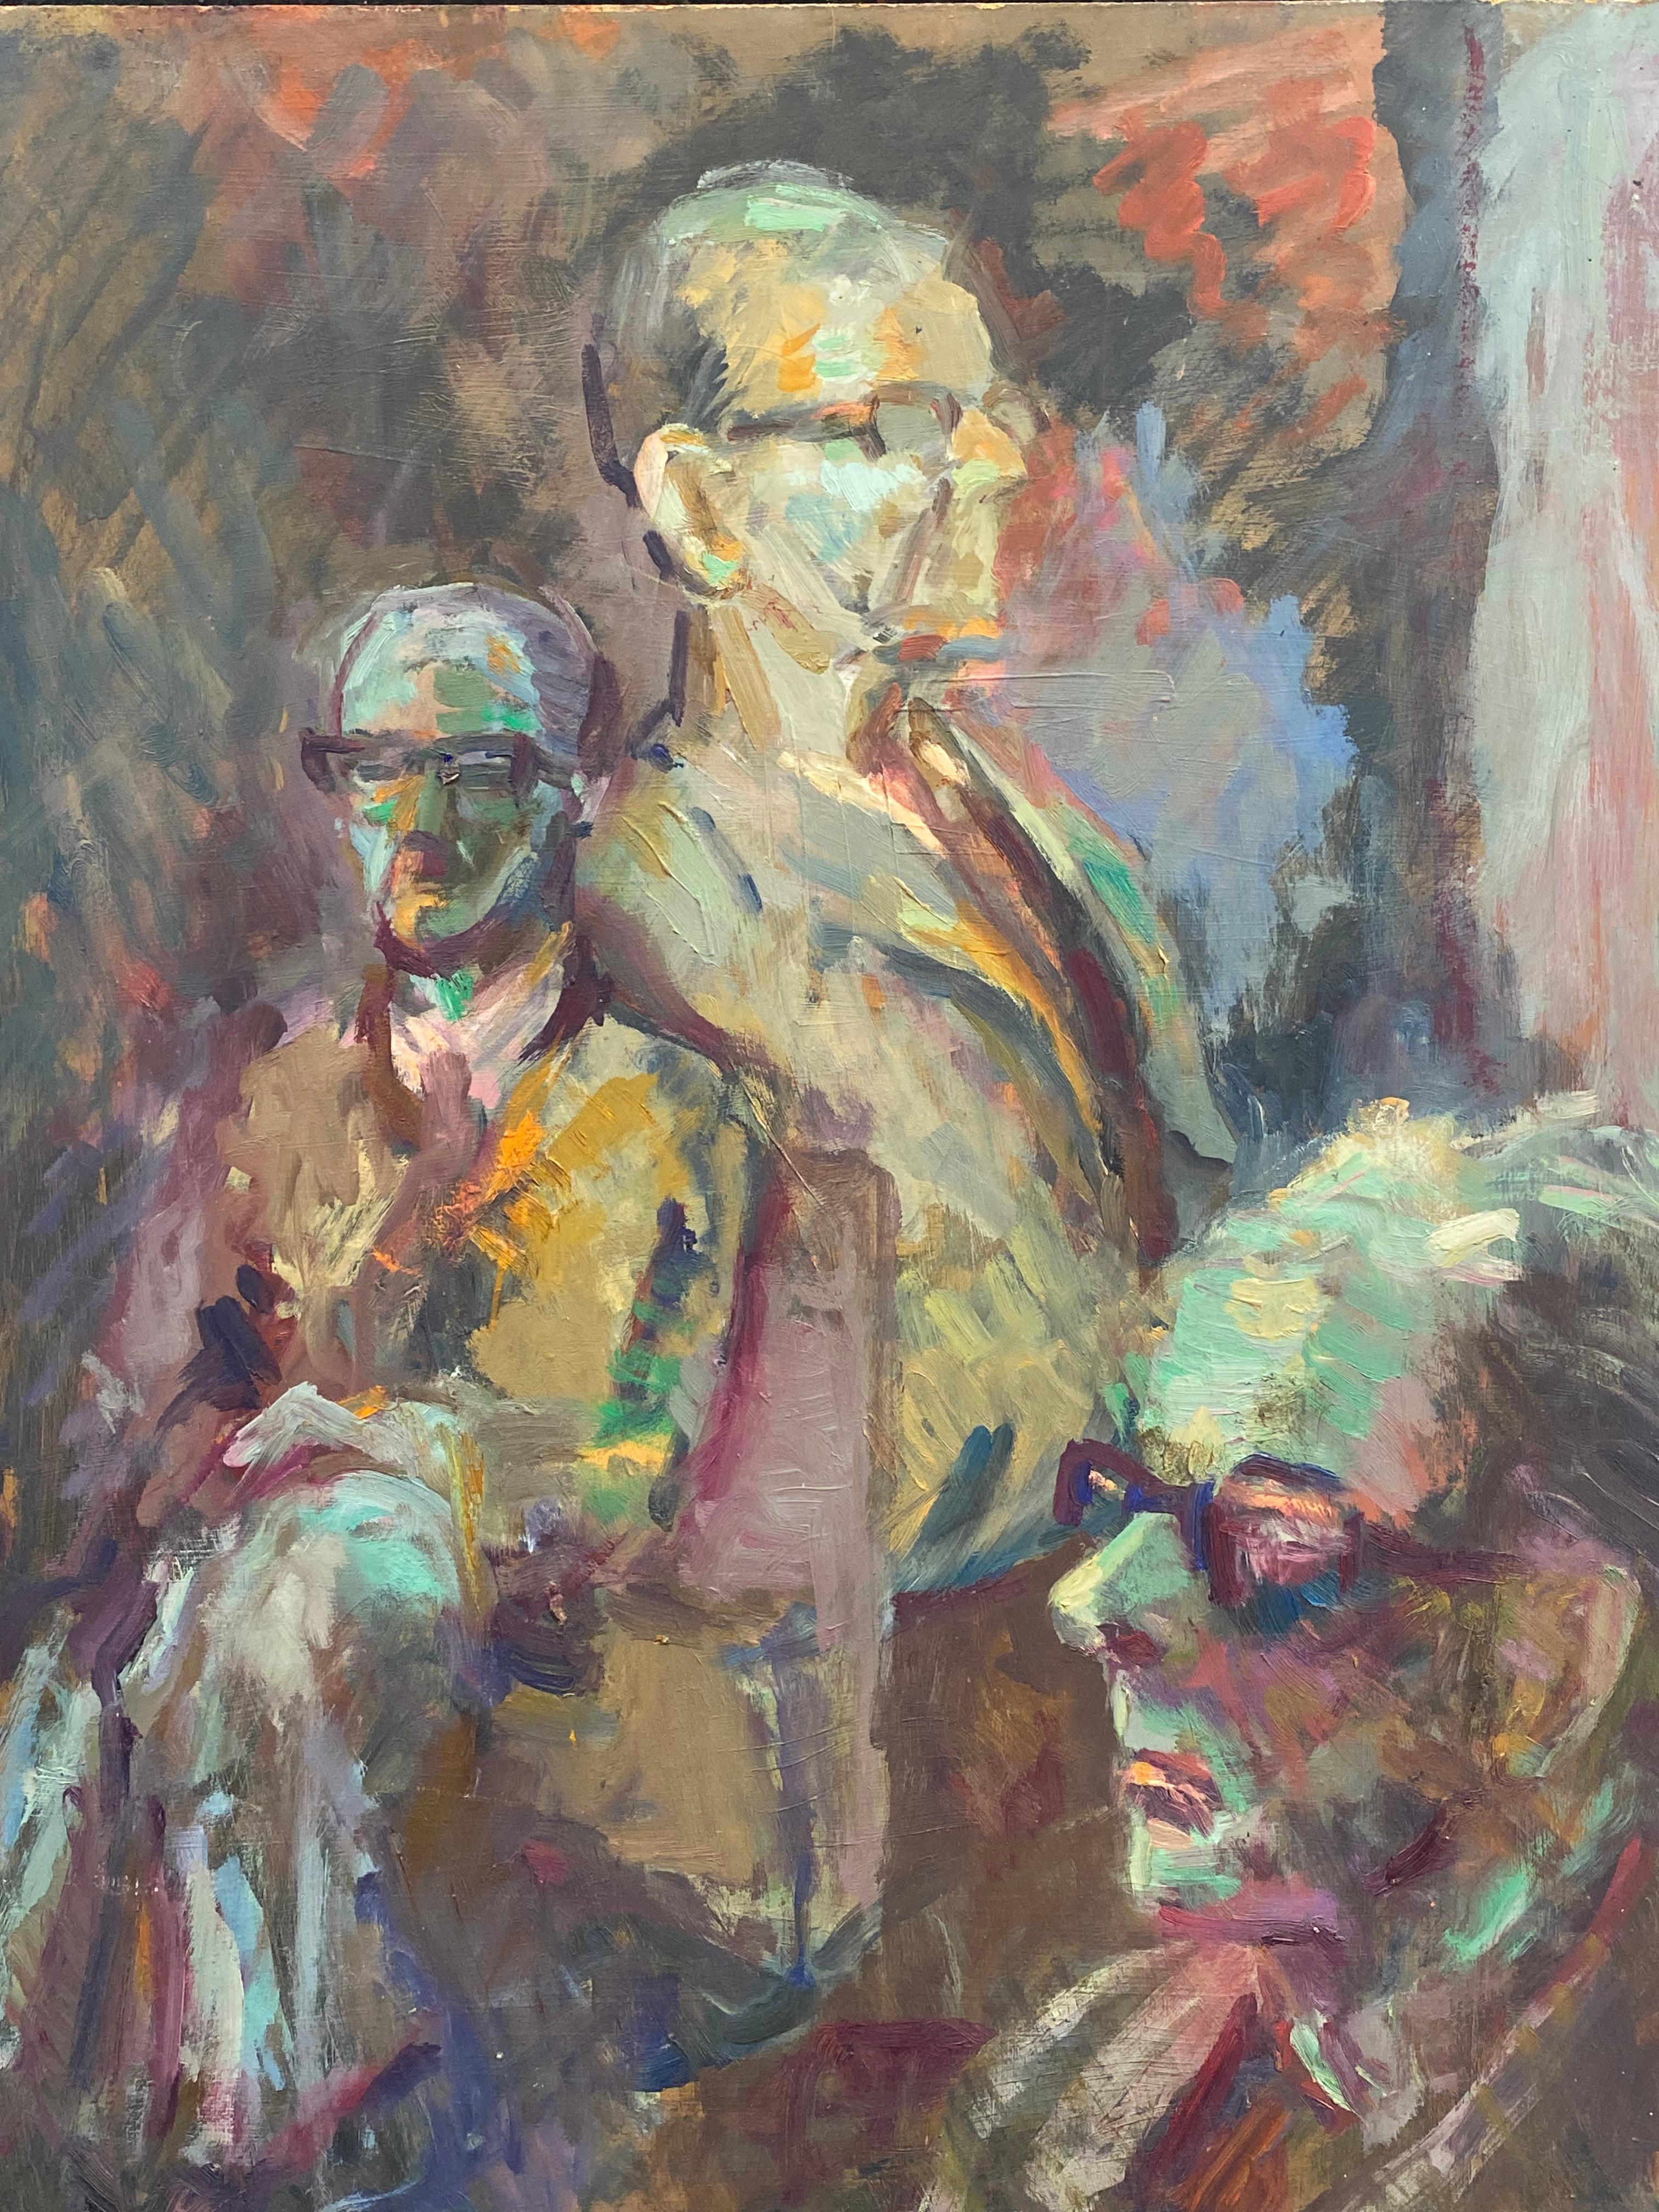 Large 1960's British Original Oil Painting - Three Figures With Glasses